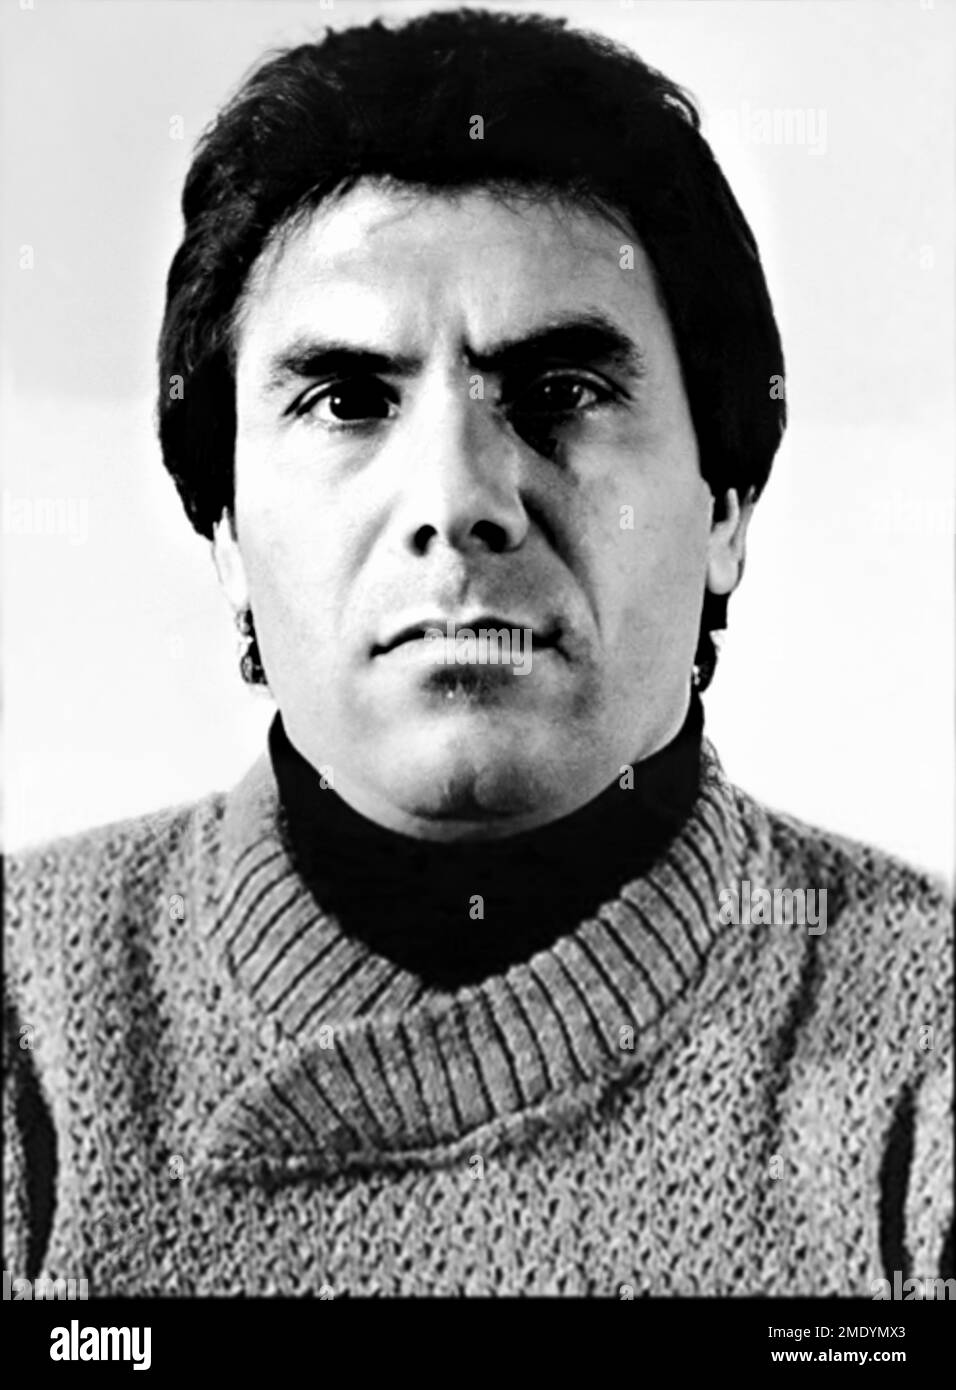 1985 ca, Corleone,  ITALY : The Mafia Boss LEOLUCA BAGARELLA ( born 3 february 1942 ), aka DON LUCHINO of Clan dei Corleonesi , italian COSA NOSTRA Mafioso . Was a Sicilian Mafia boss from Corleone ( Palermo ) . Author of hundreds of murders from the 70s to the 90s, as well as being directly responsible for some of the most serious bloodshed of Cosa Nostra, including the Capaci massacre and the kidnapping of little Giuseppe Di Matteo . He has had convictions for multiple murder, drug trafficking, receiving stolen goods, massacre and was sentenced to life imprisonment in a 41 bis prison regime. Stock Photo